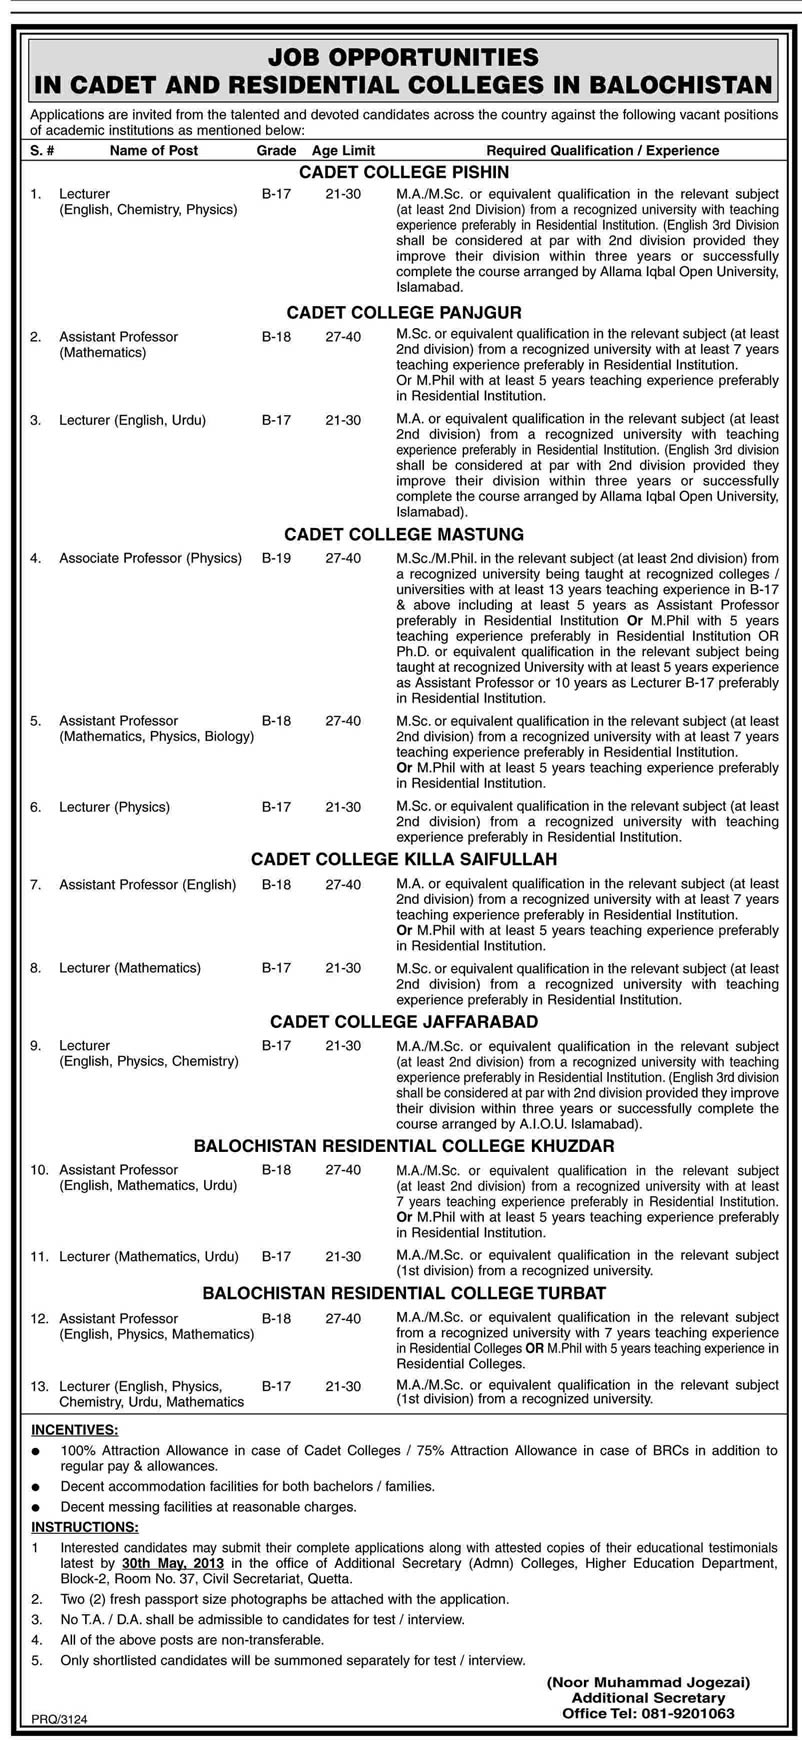 Teaching Faculty Jobs in Cadet & Residential Colleges of Balochistan 2013